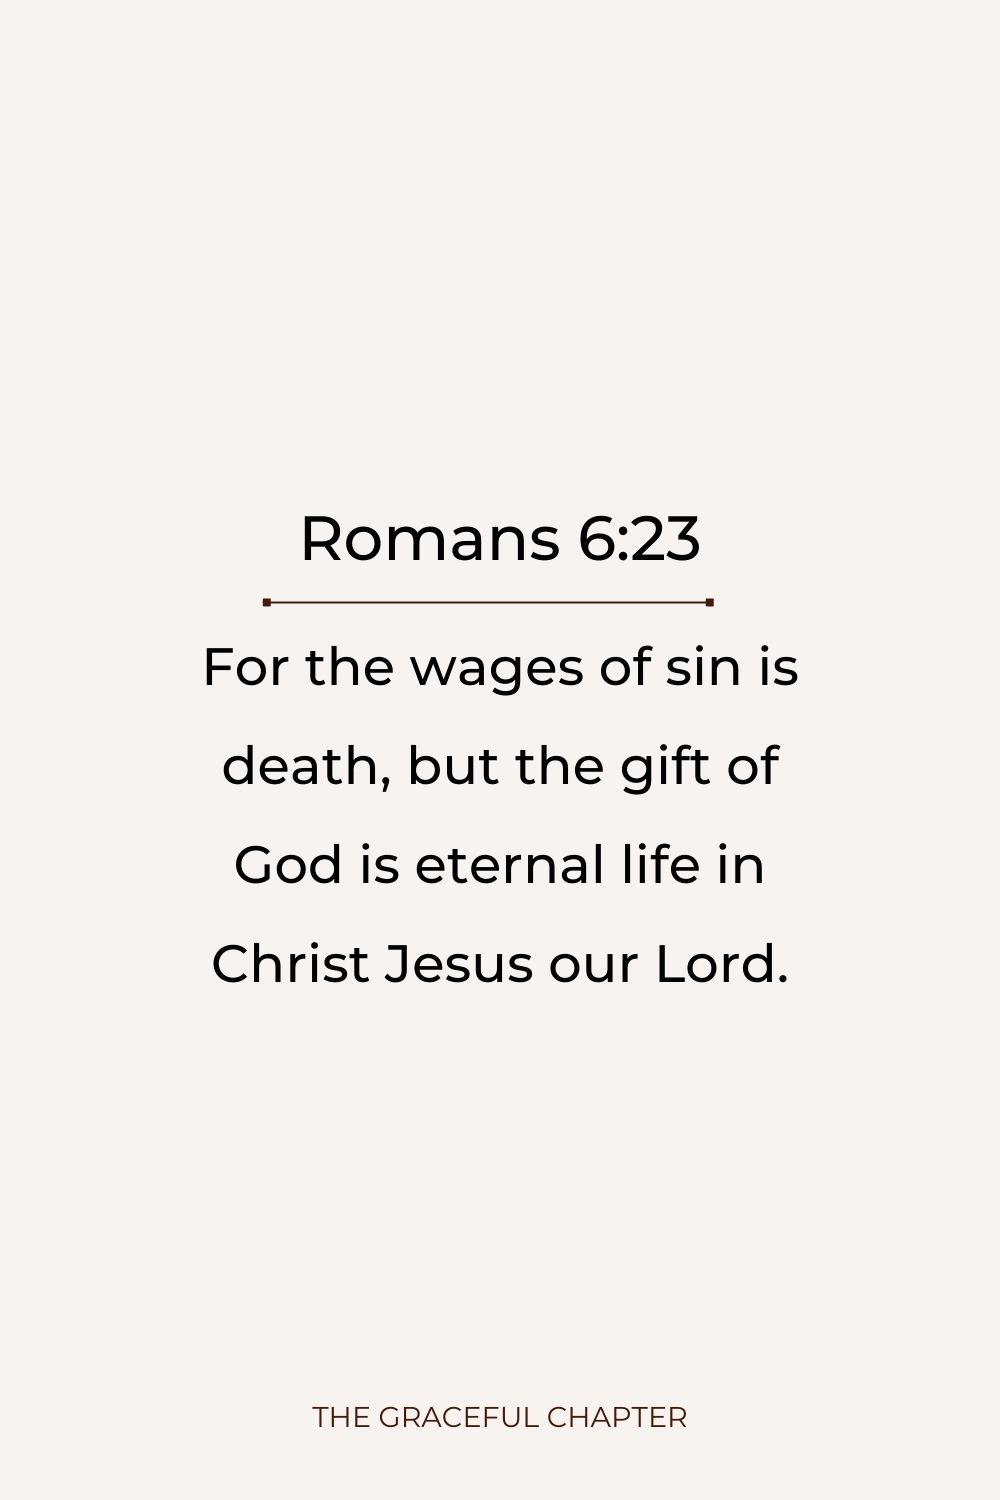 For the wages of sin is death, but the gift of God is eternal life in Christ Jesus our Lord. Romans 6:23